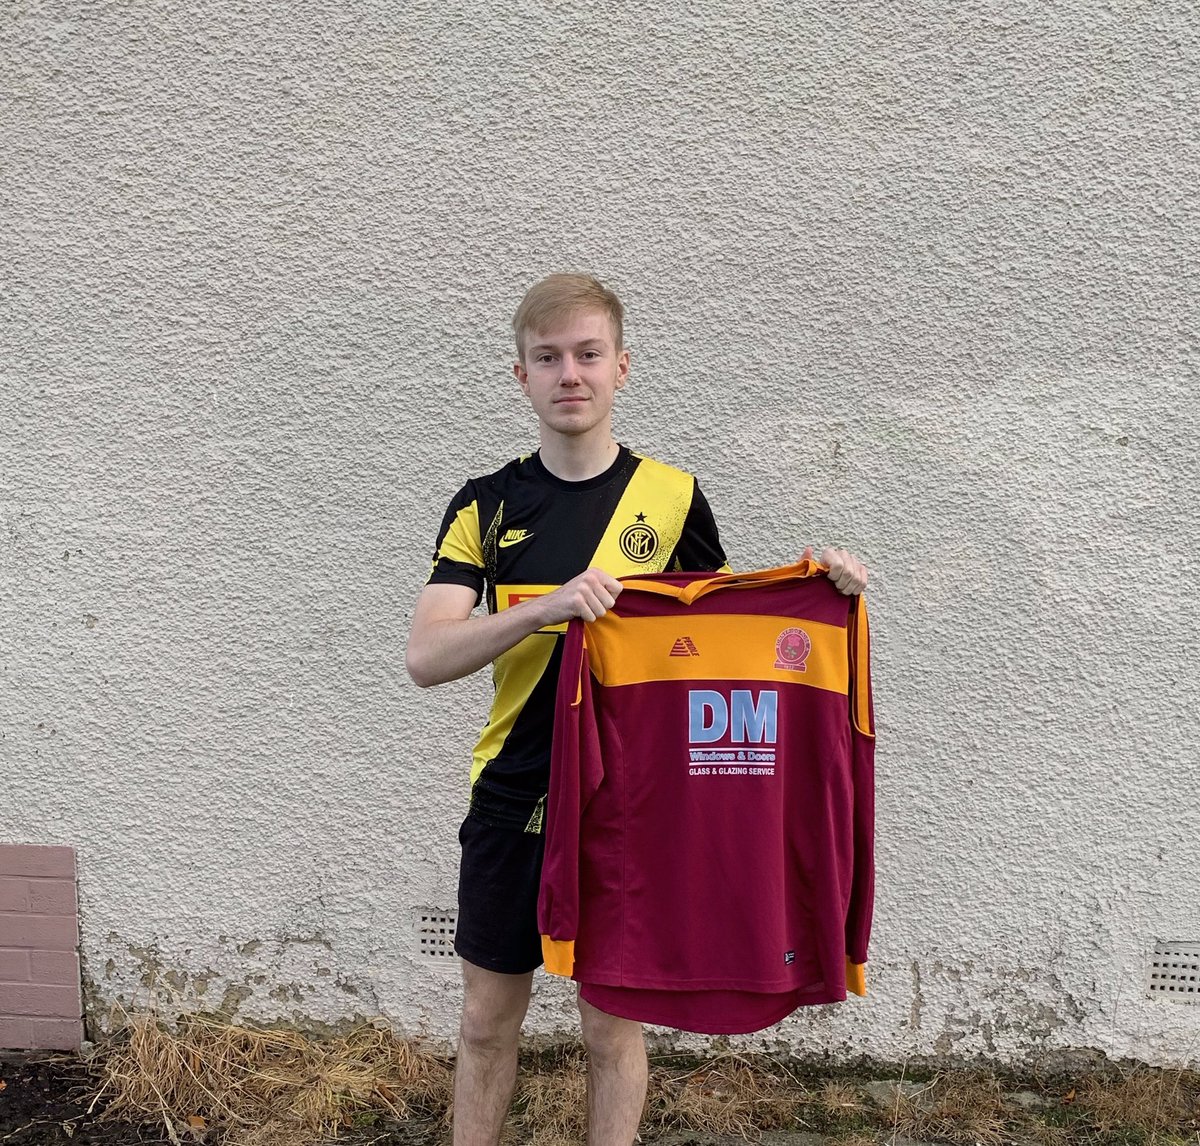 ✍️ Next up we have Cammy Douglas who has also signed for this season. Cammy is an exceptionally quick player who can play on both wings as well as up front. His ability to dribble past players with ease allows him to create chances for himself and others.